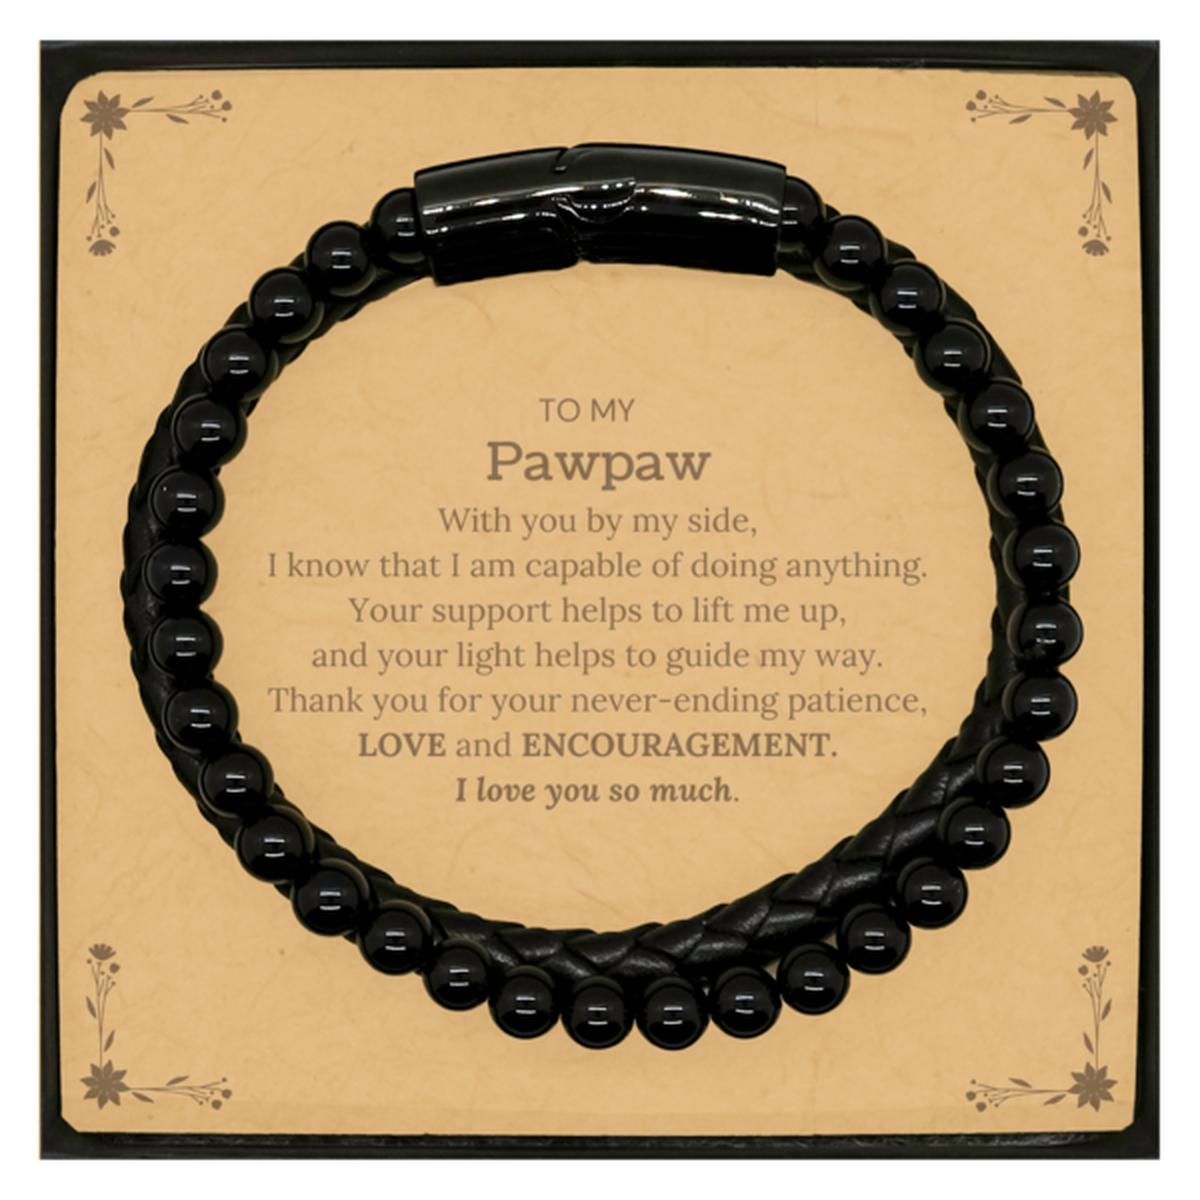 Appreciation Pawpaw Stone Leather Bracelets Gifts, To My Pawpaw Birthday Christmas Wedding Keepsake Gifts for Pawpaw With you by my side, I know that I am capable of doing anything. I love you so much